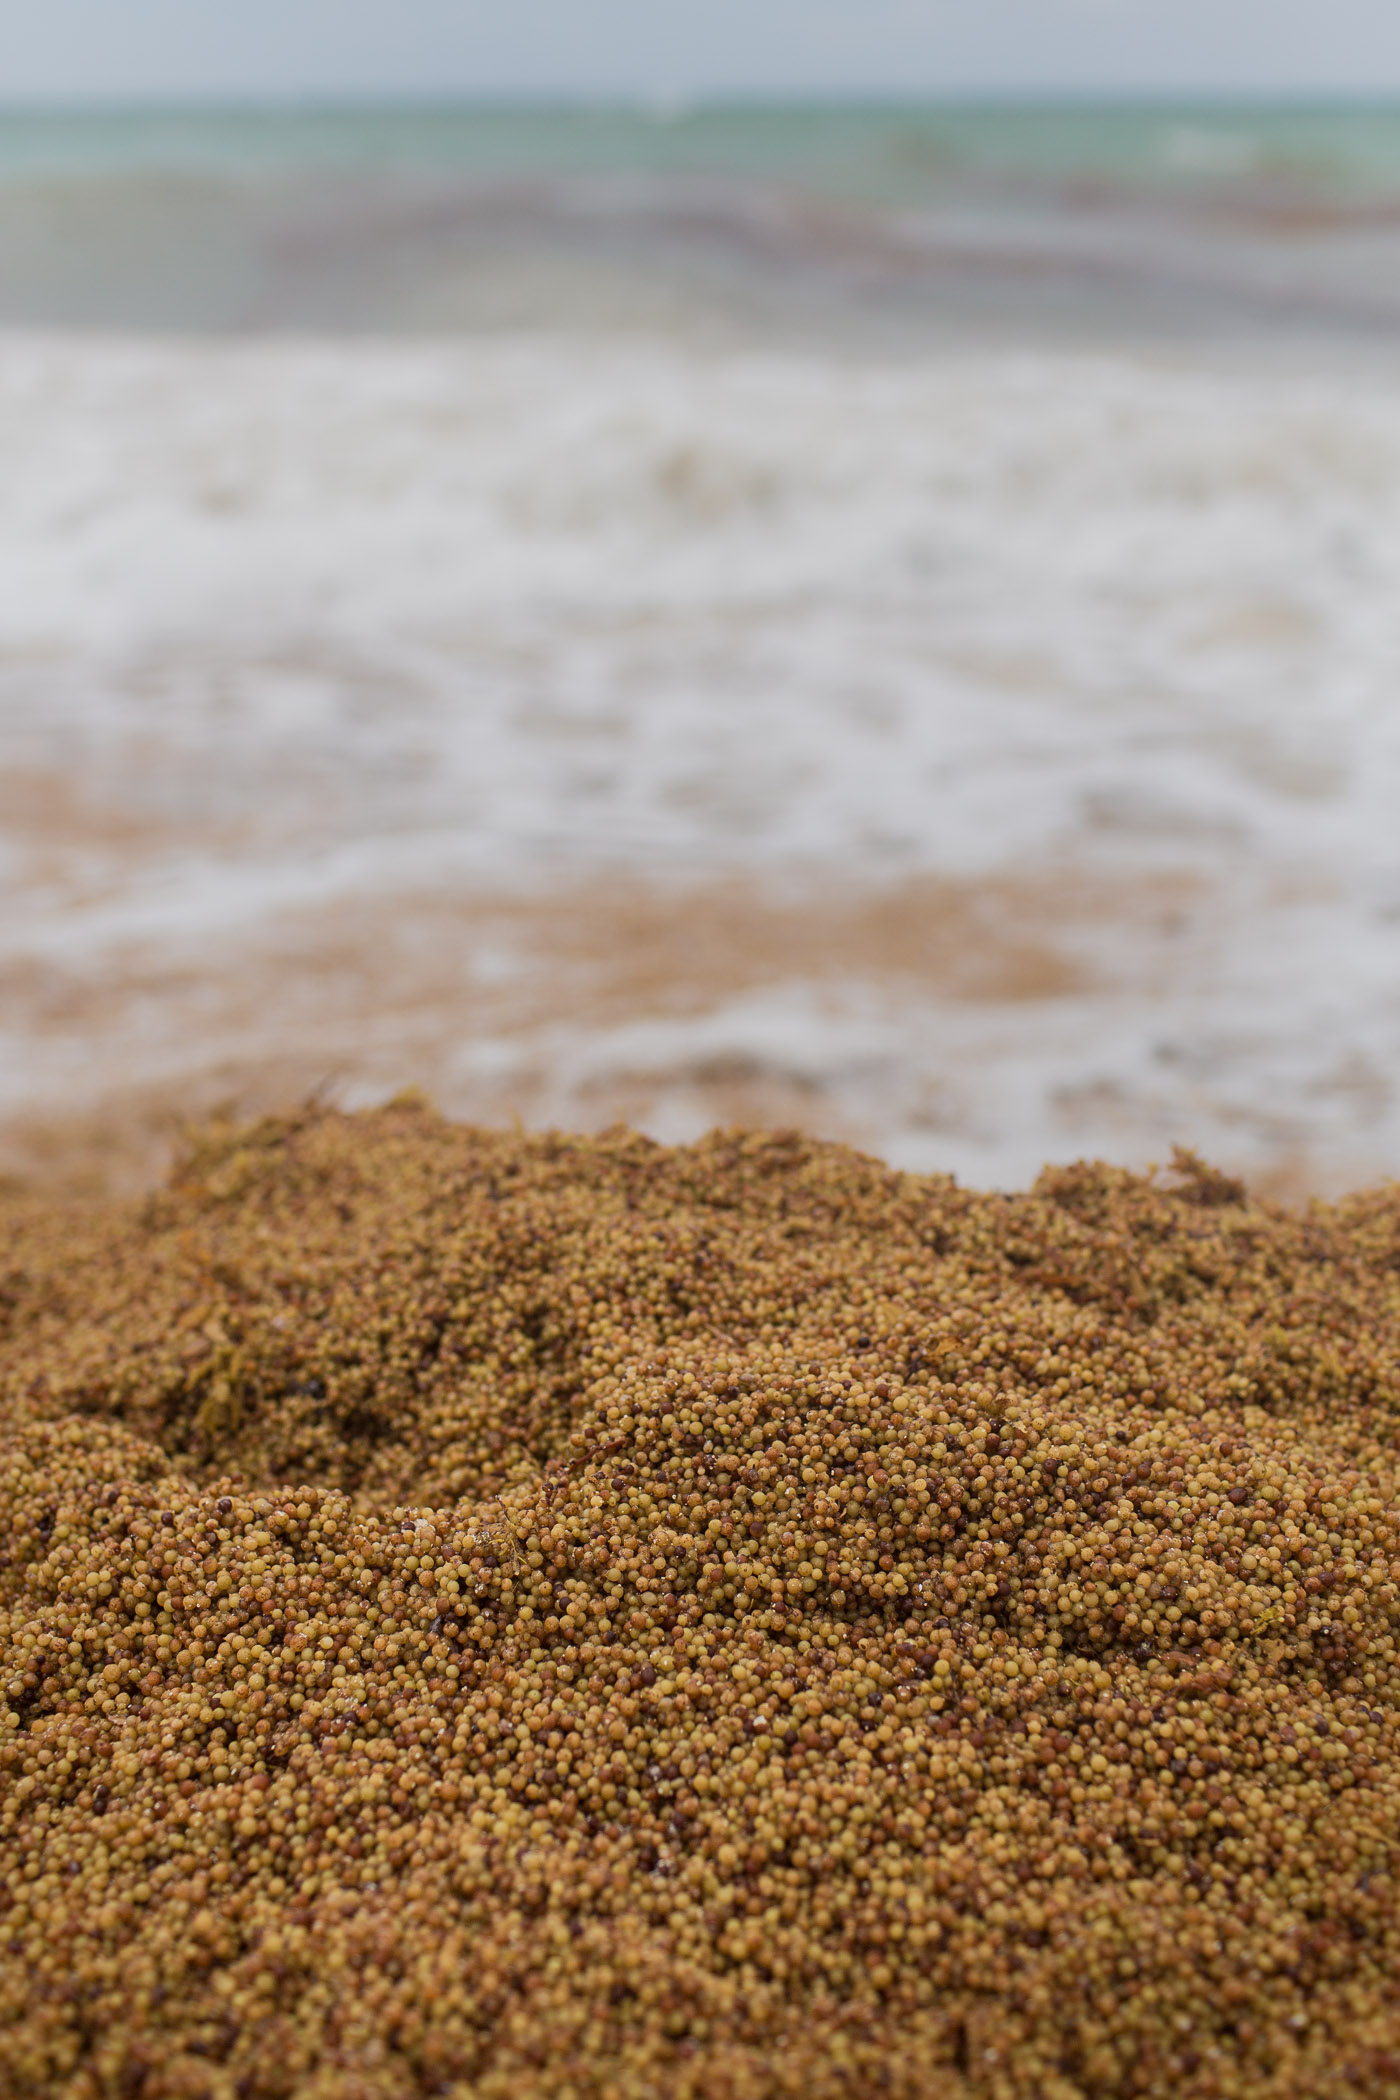 Seaweed washed ashore from Hurricane Joaquin in Grand Cayman